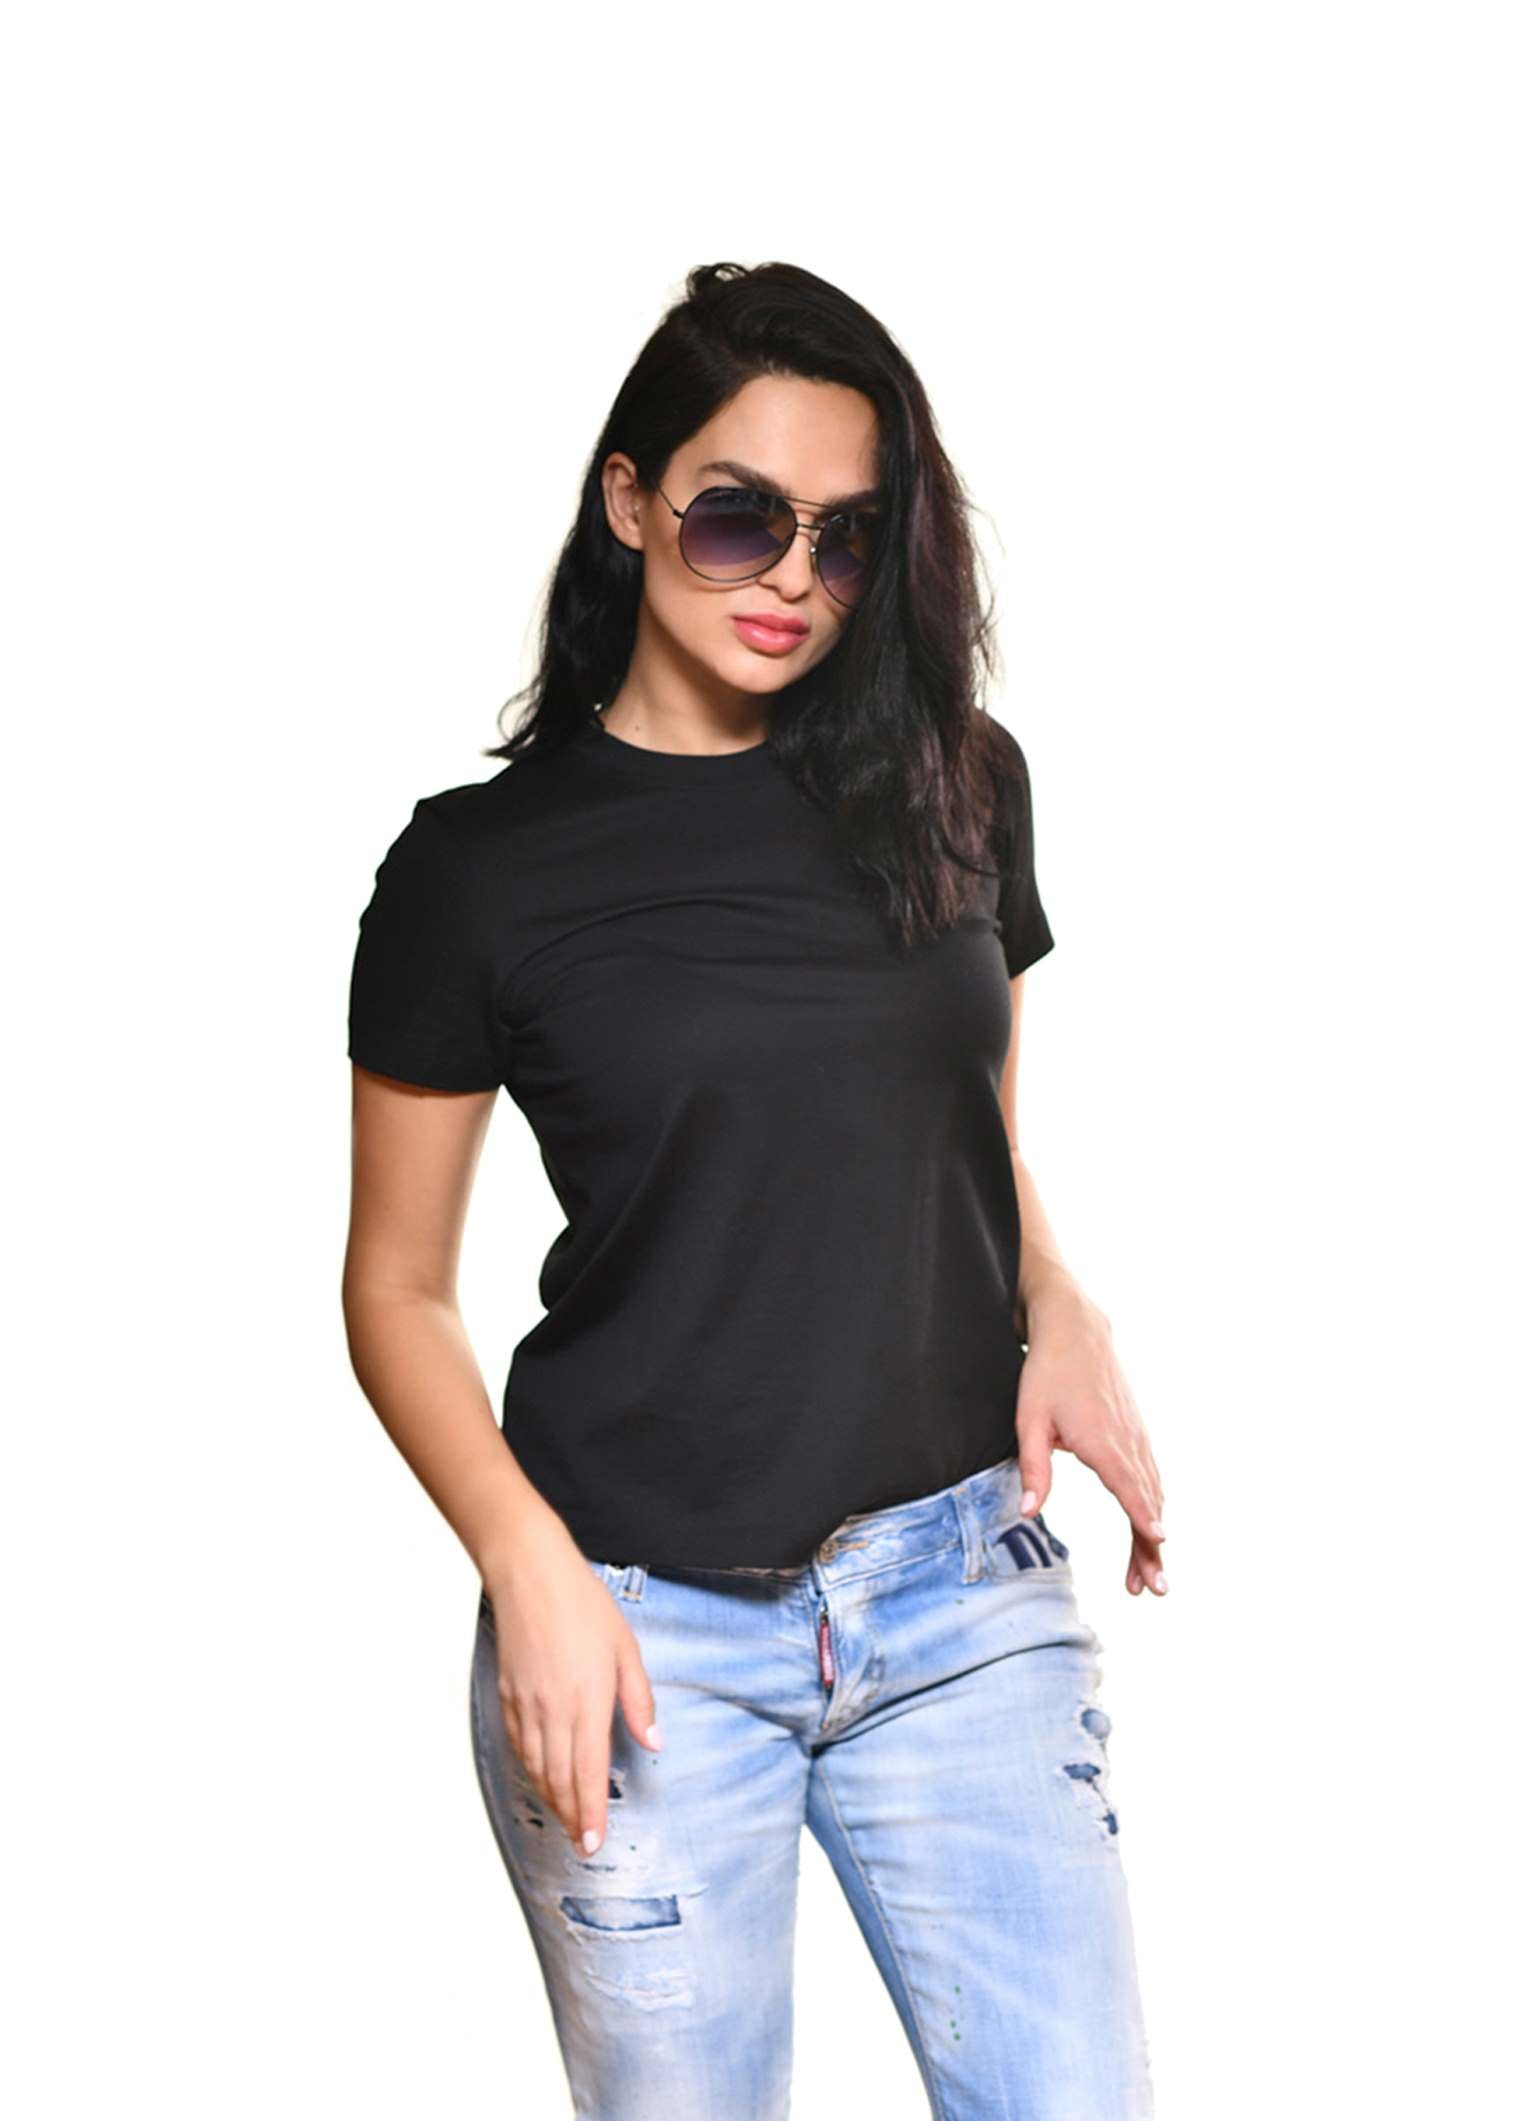 Carmen Sol tee shirts for women pure Italian sustainable cotton in color black